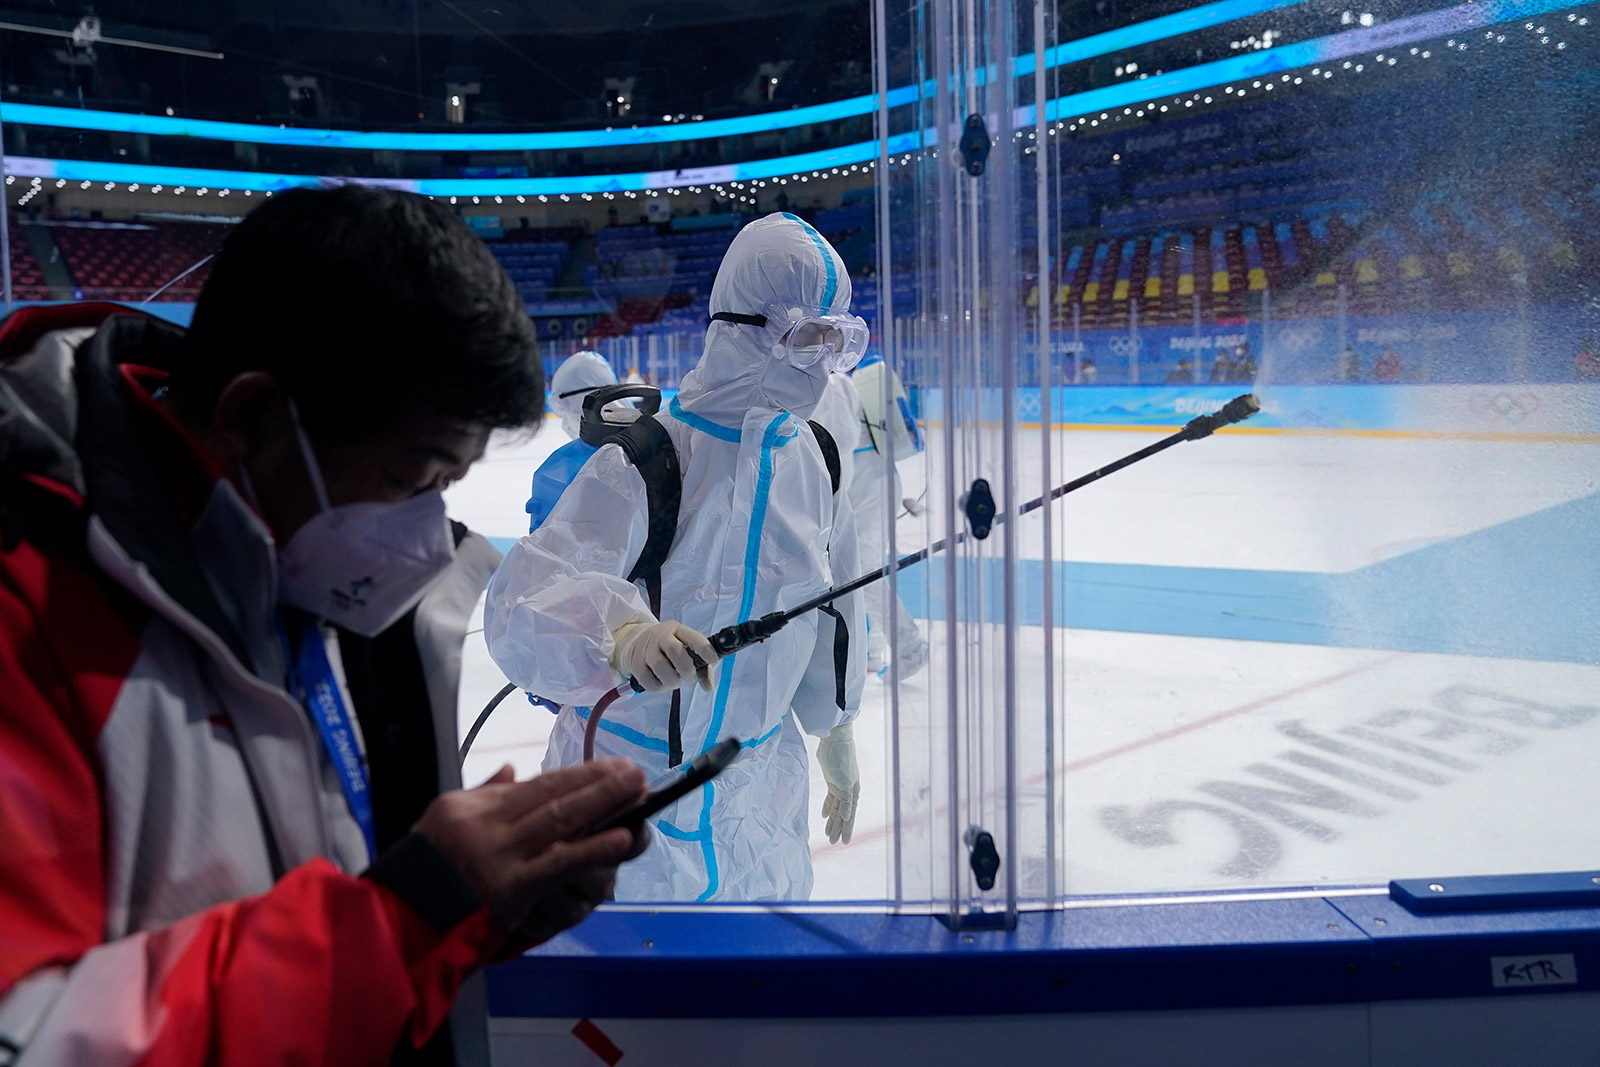 A worker disinfects the ice rink after the women's gold-medal hockey game on Thursday.